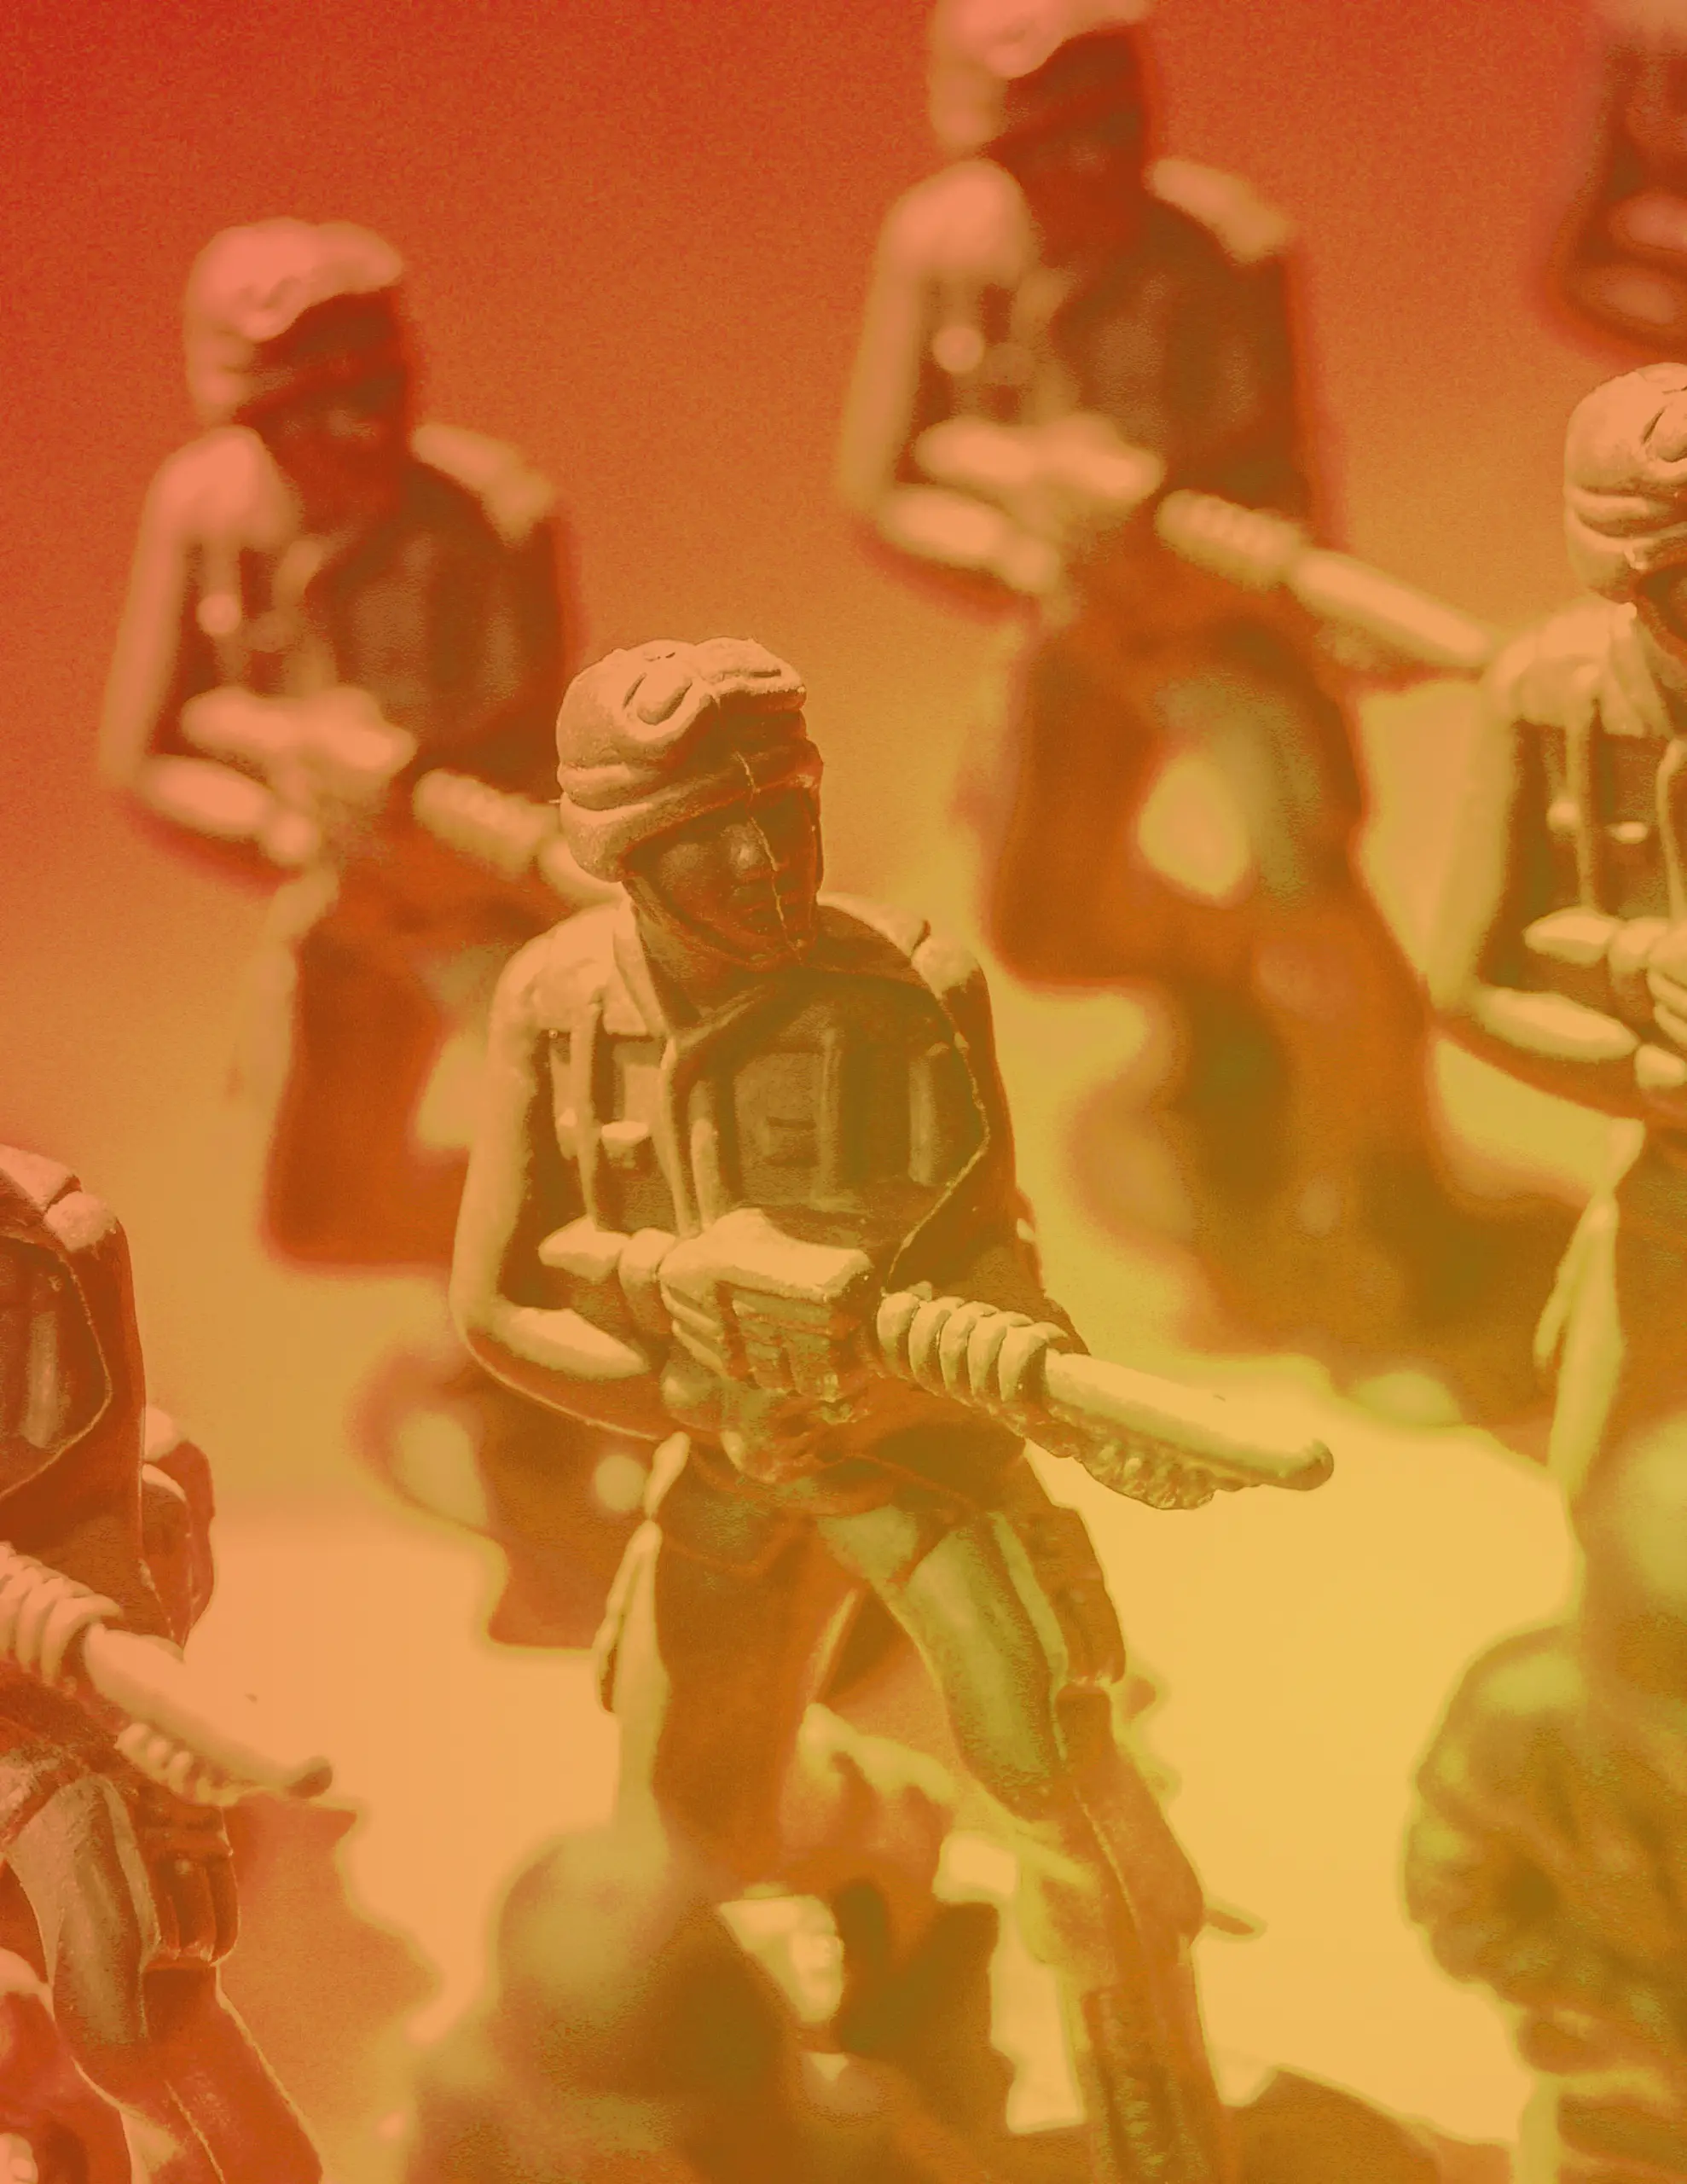 Image of toy soldiers with a red and yellow overlay